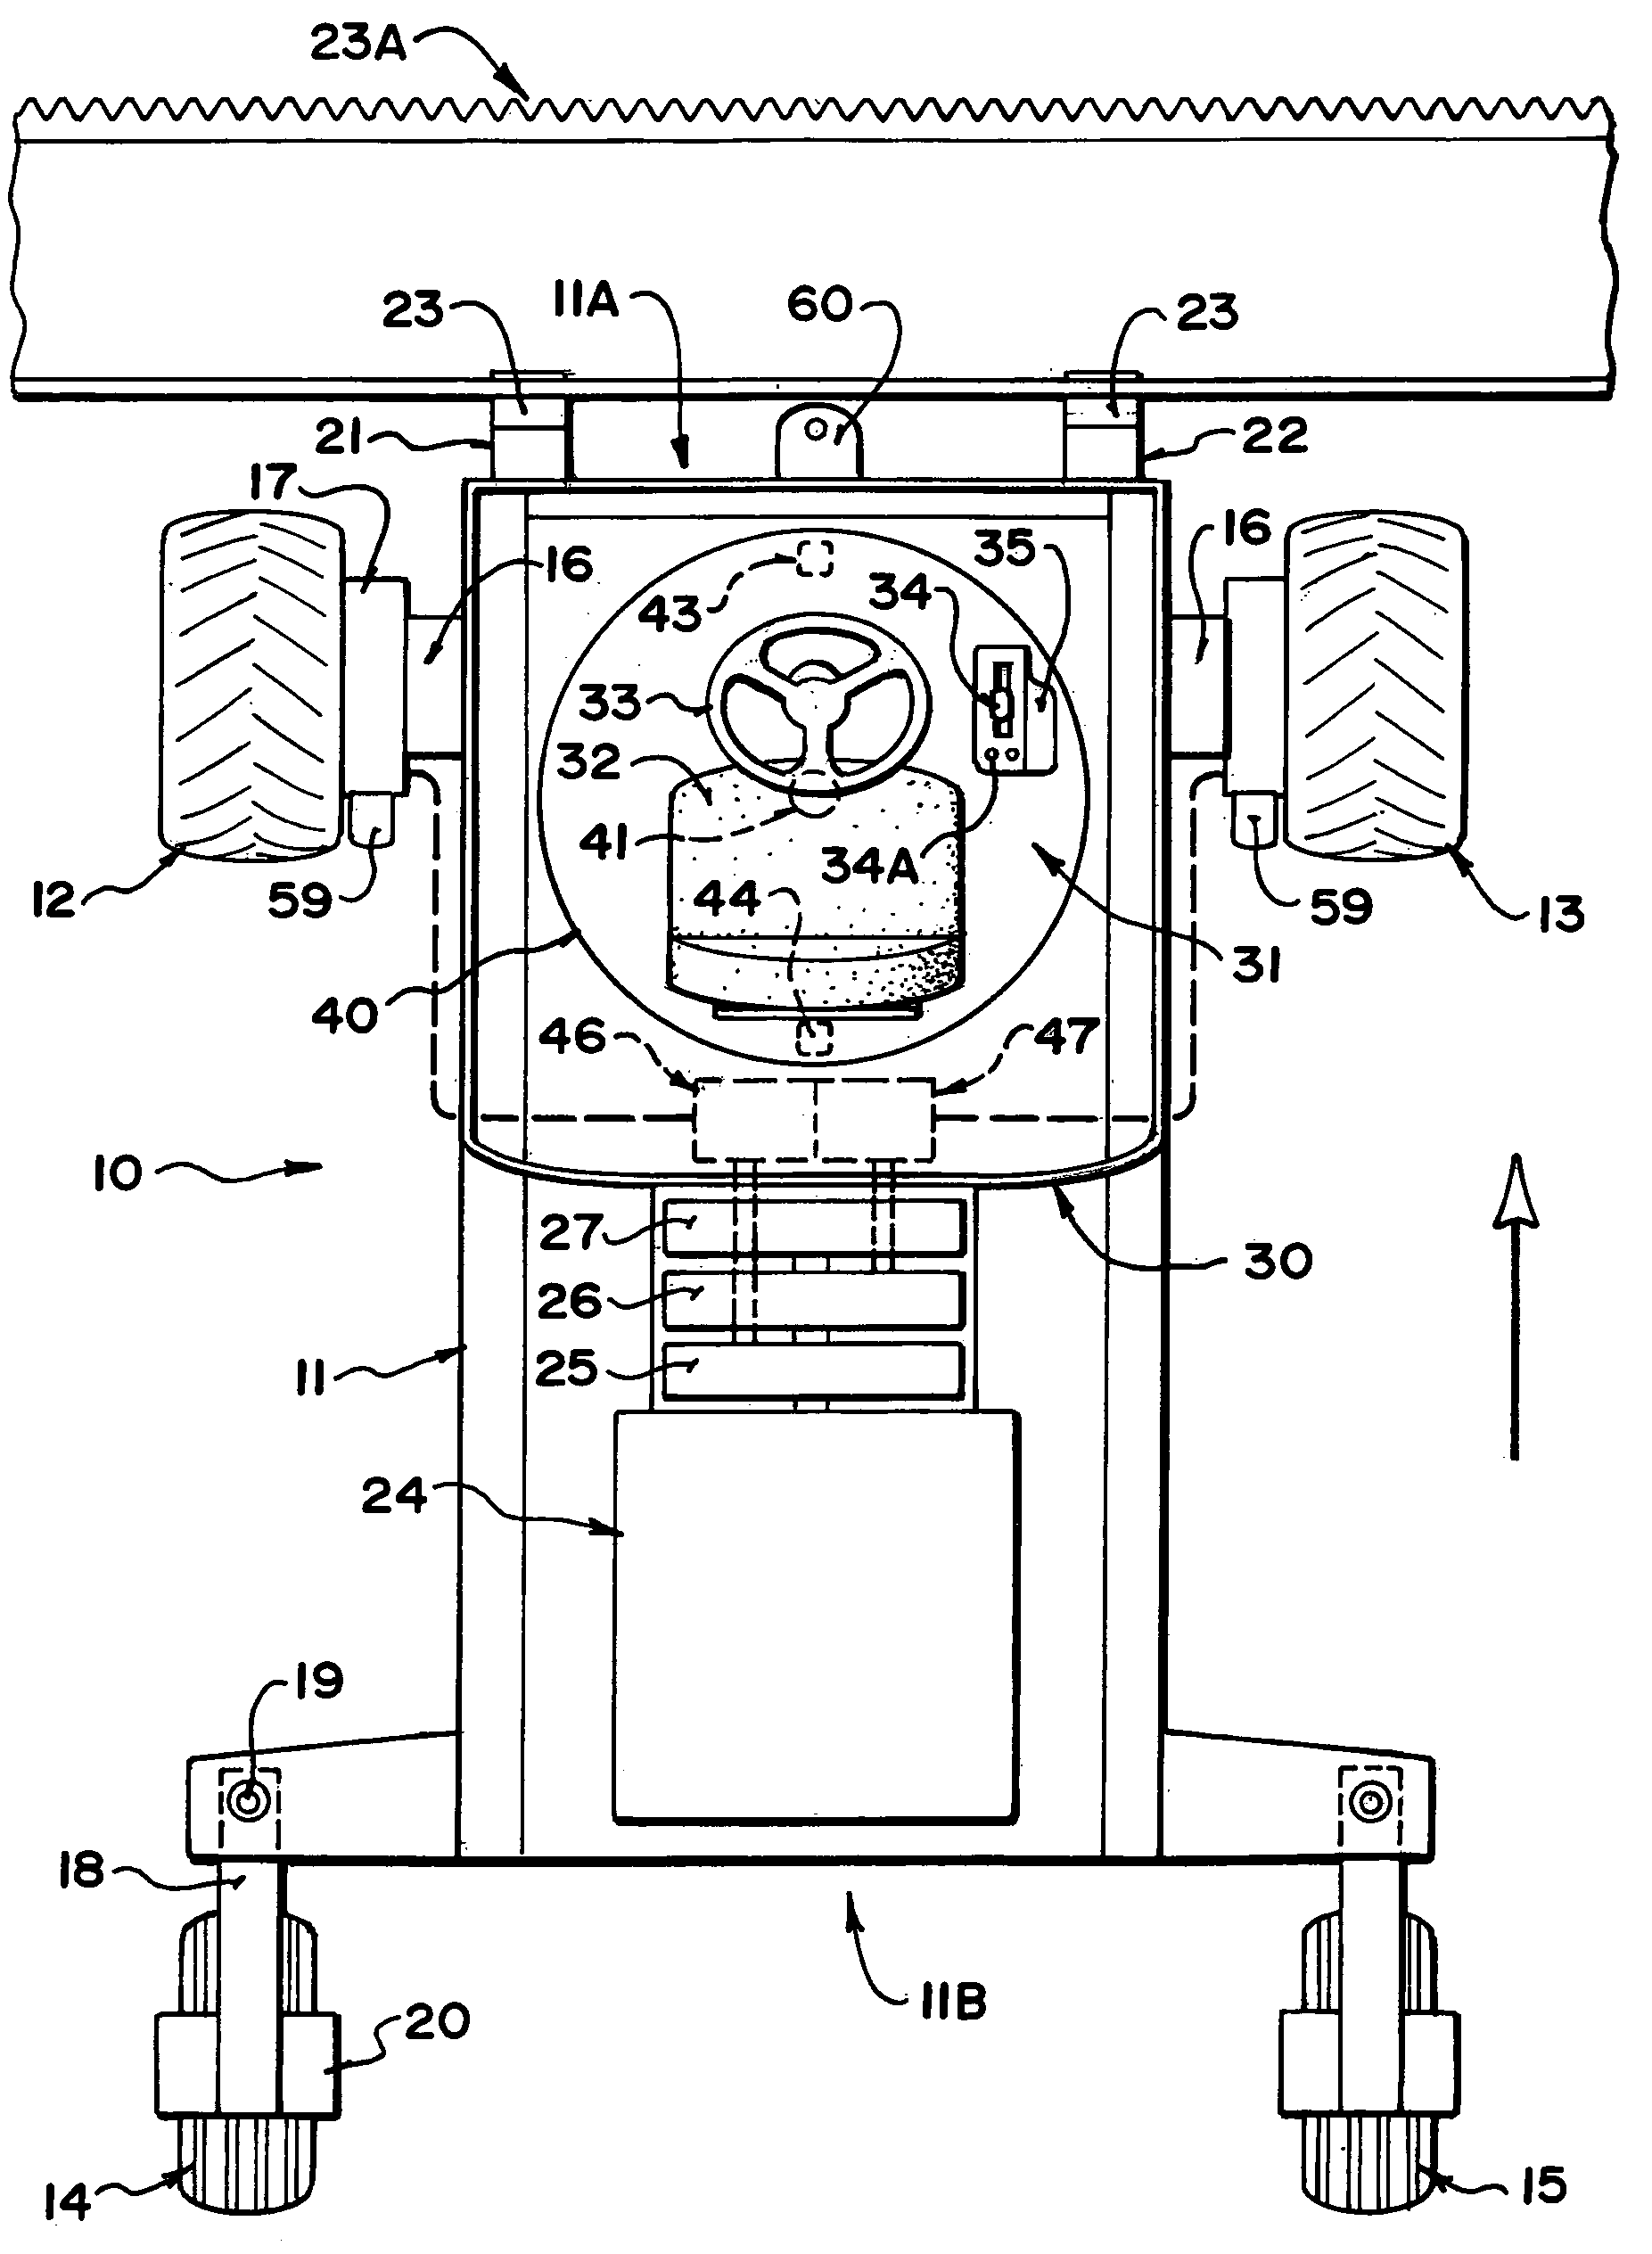 Tractor with reversible operator position for operation and transport